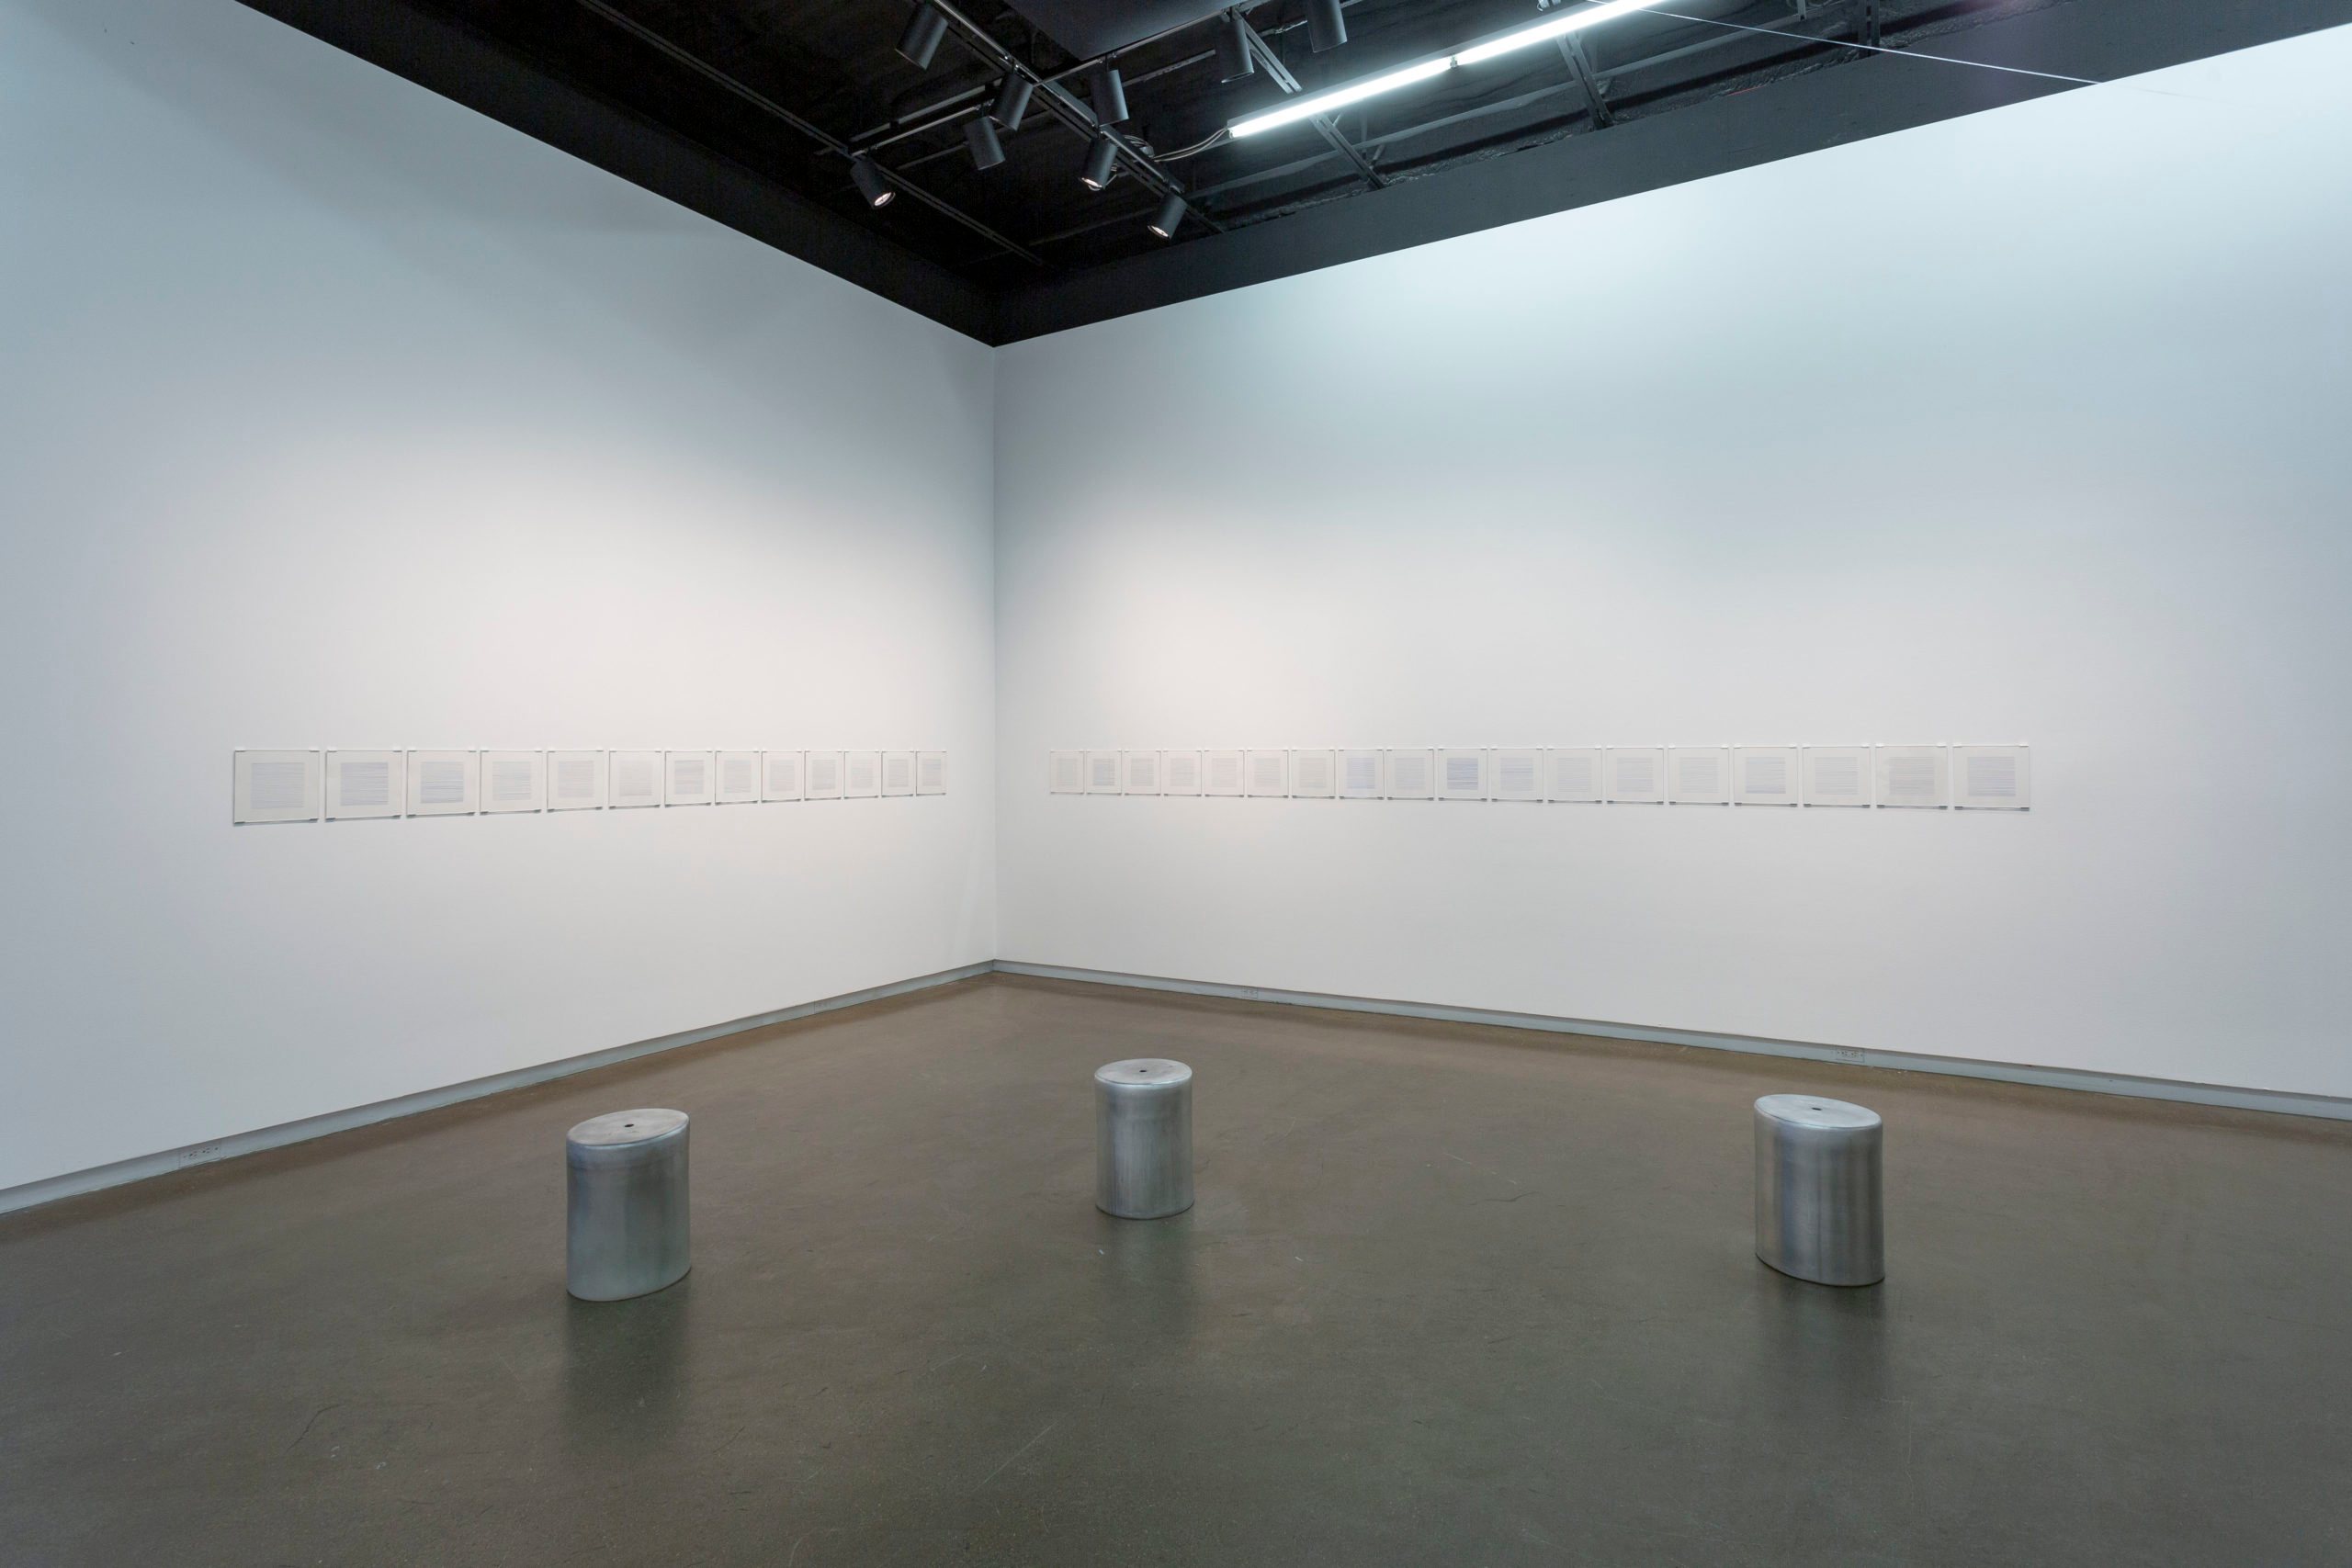     Group exhibition, a soft landing, installation view, Gallery TPW, 2022. Courtesy of the artists and Gallery TPW

